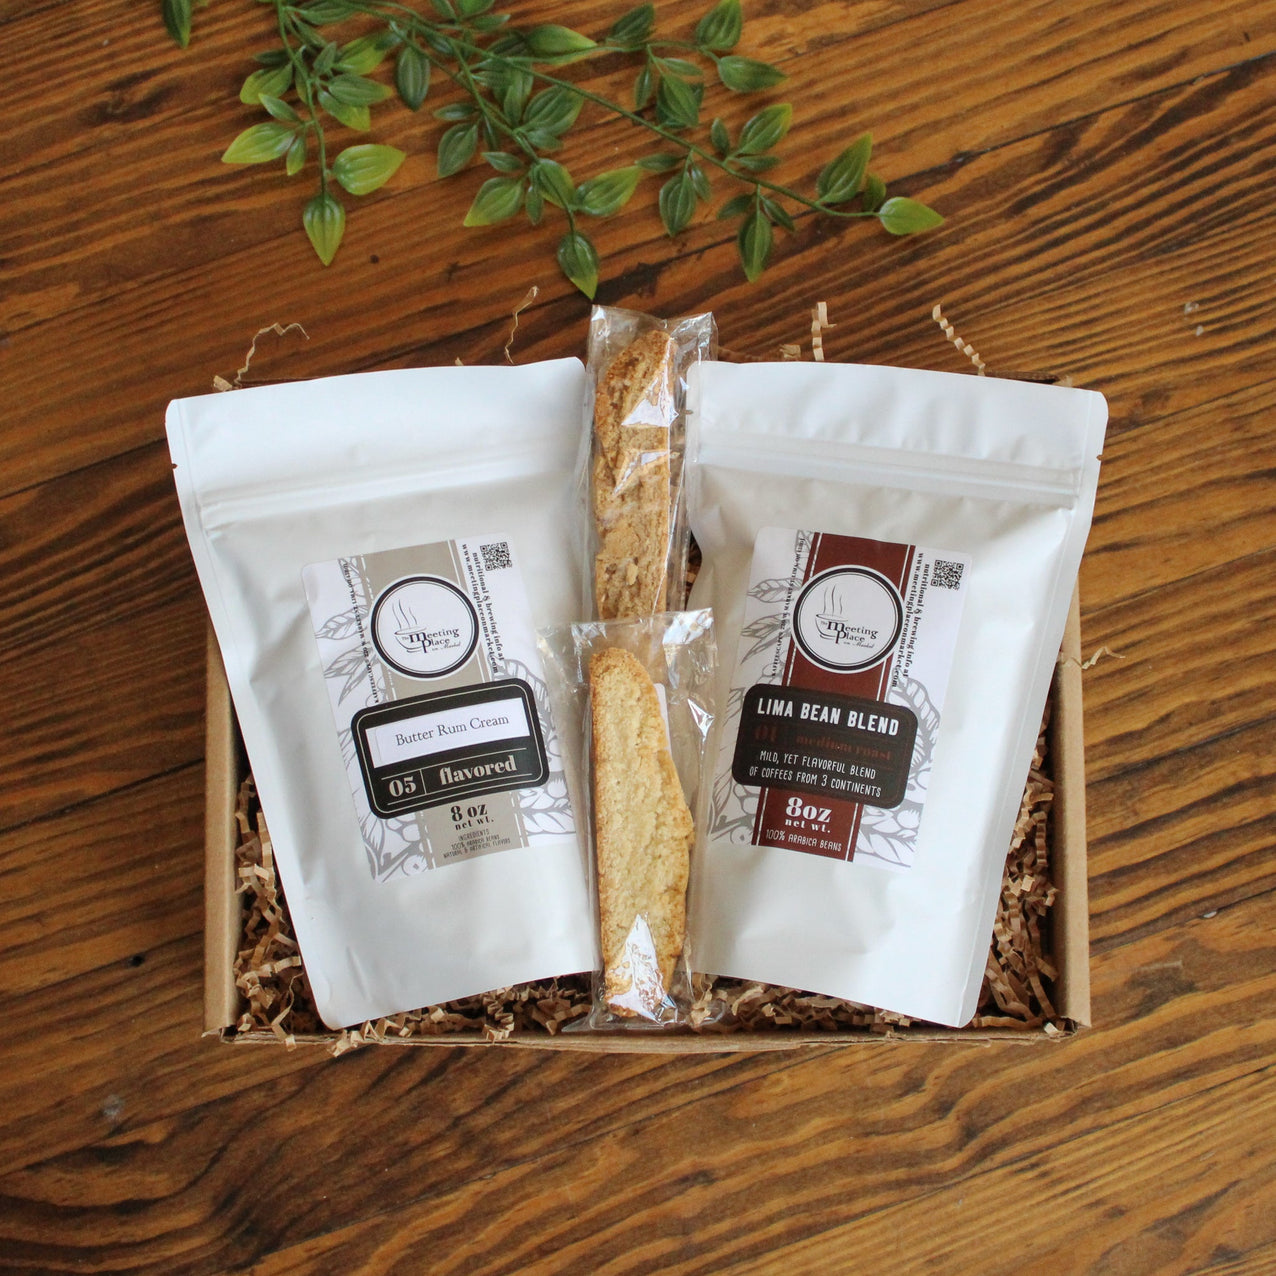 New Year Premium Gourmet Coffee Gift Set New Year Gift - The Meeting Place on Market